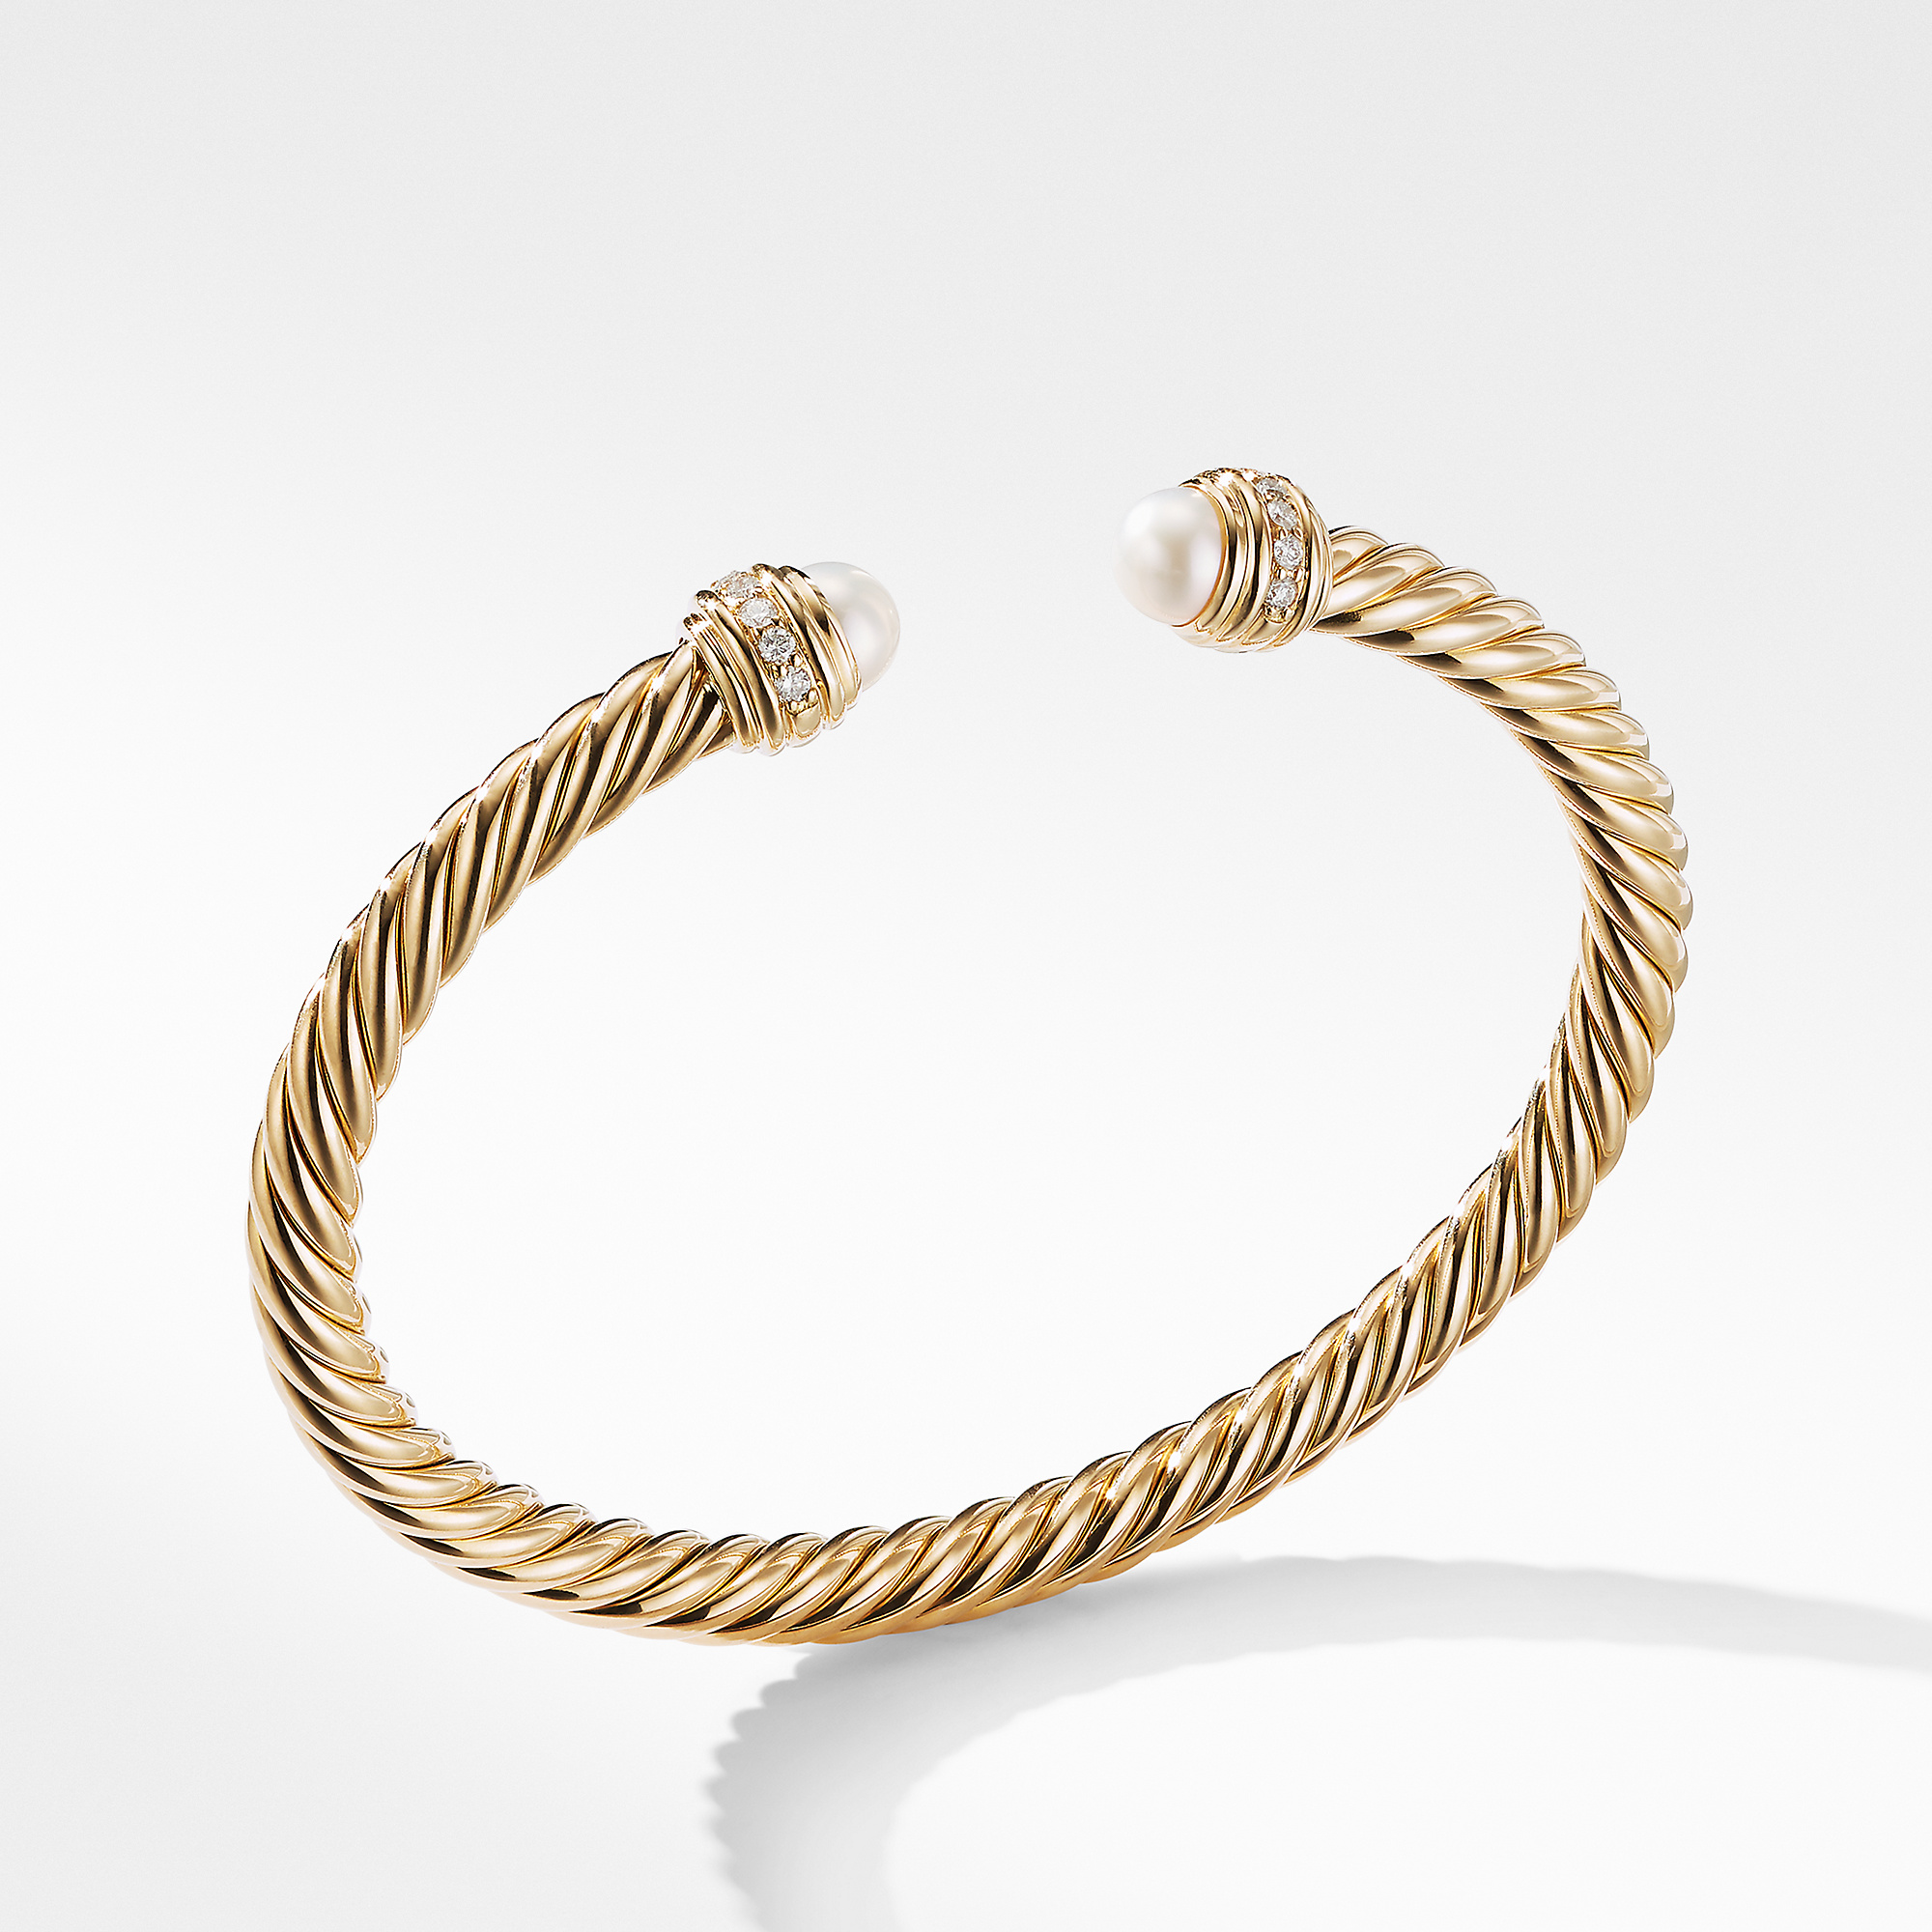 Cable Bracelet in 18K Gold with Pearls and Diamonds - B14483D88DPEDI